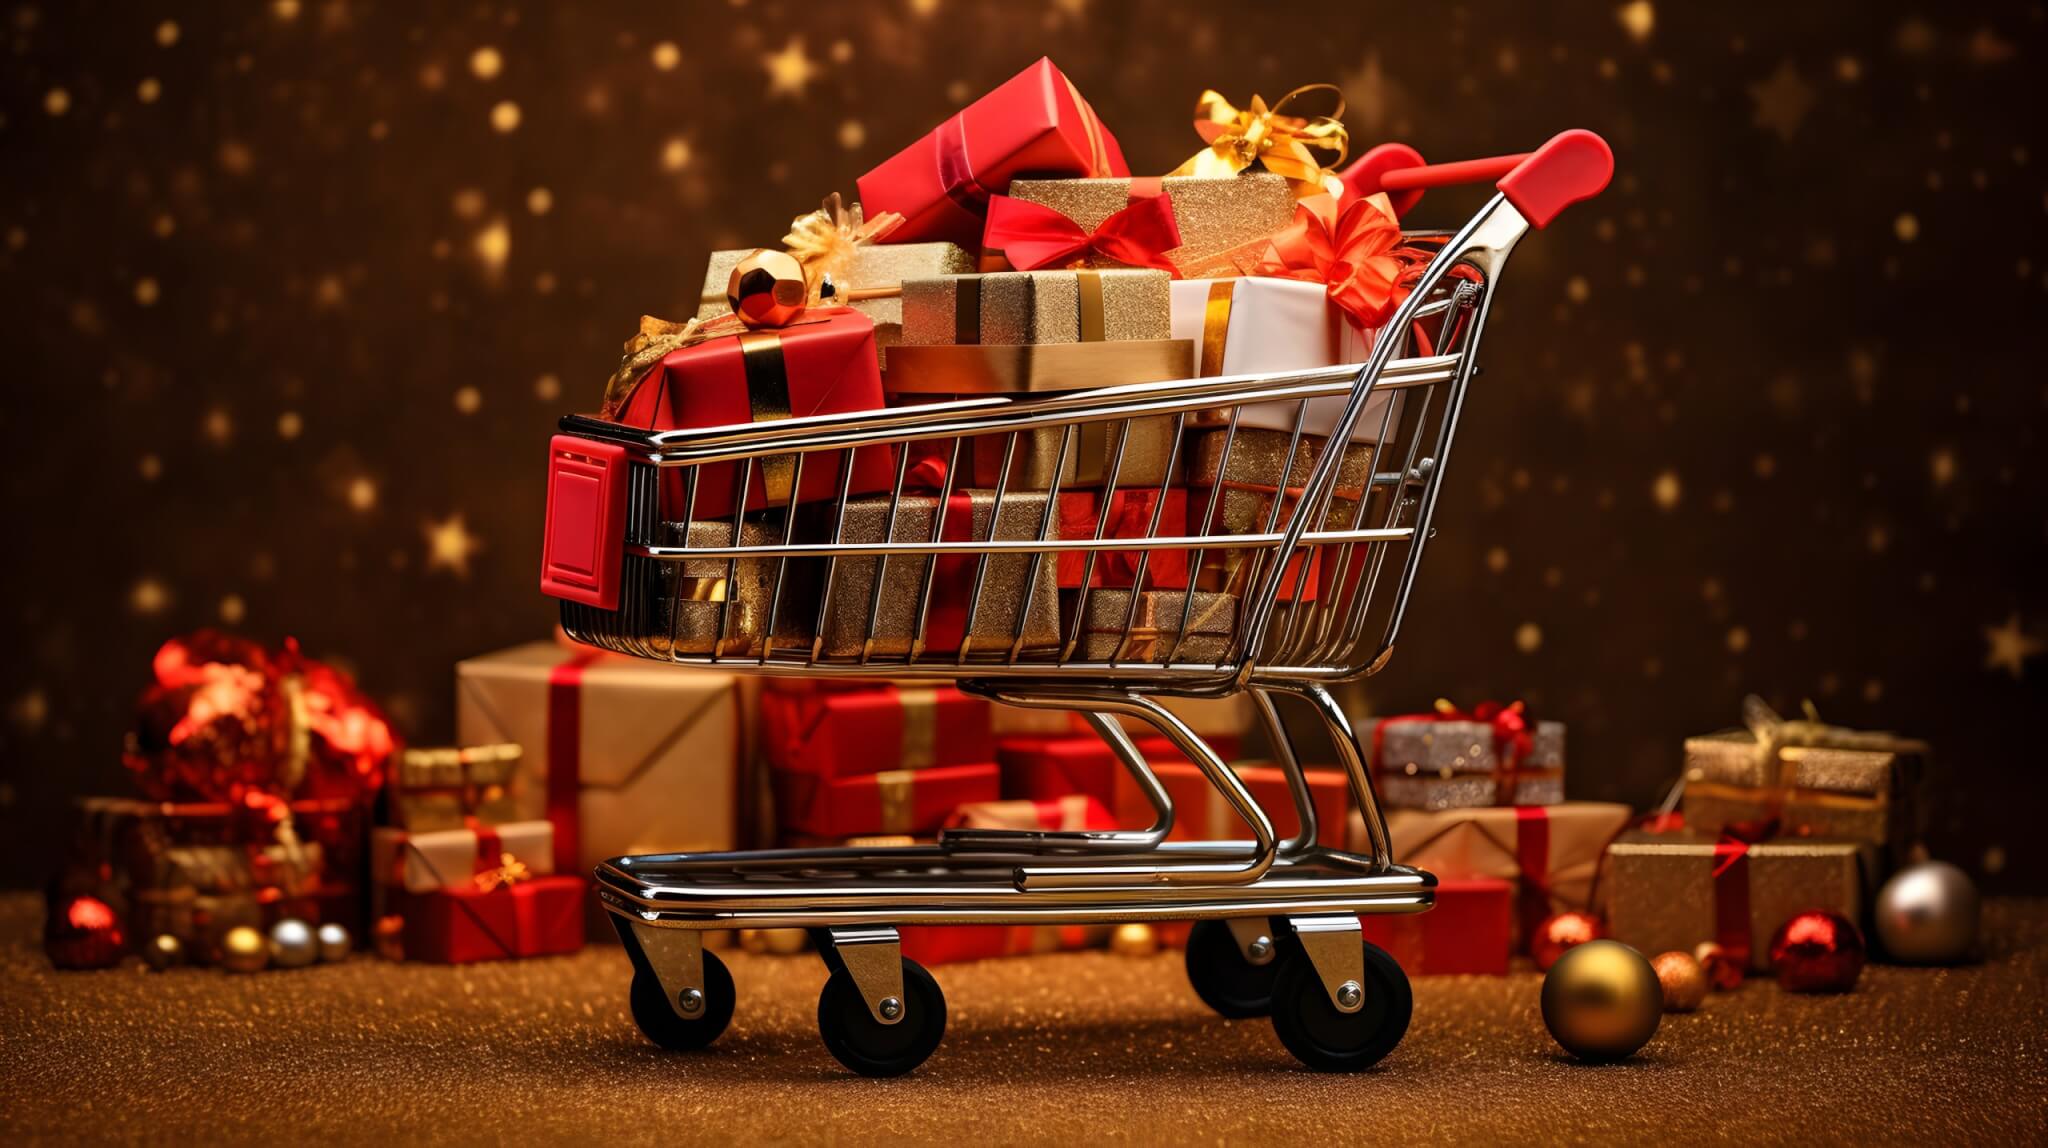 Making use of Online Business Directories for Last-Minute Christmas Shopping